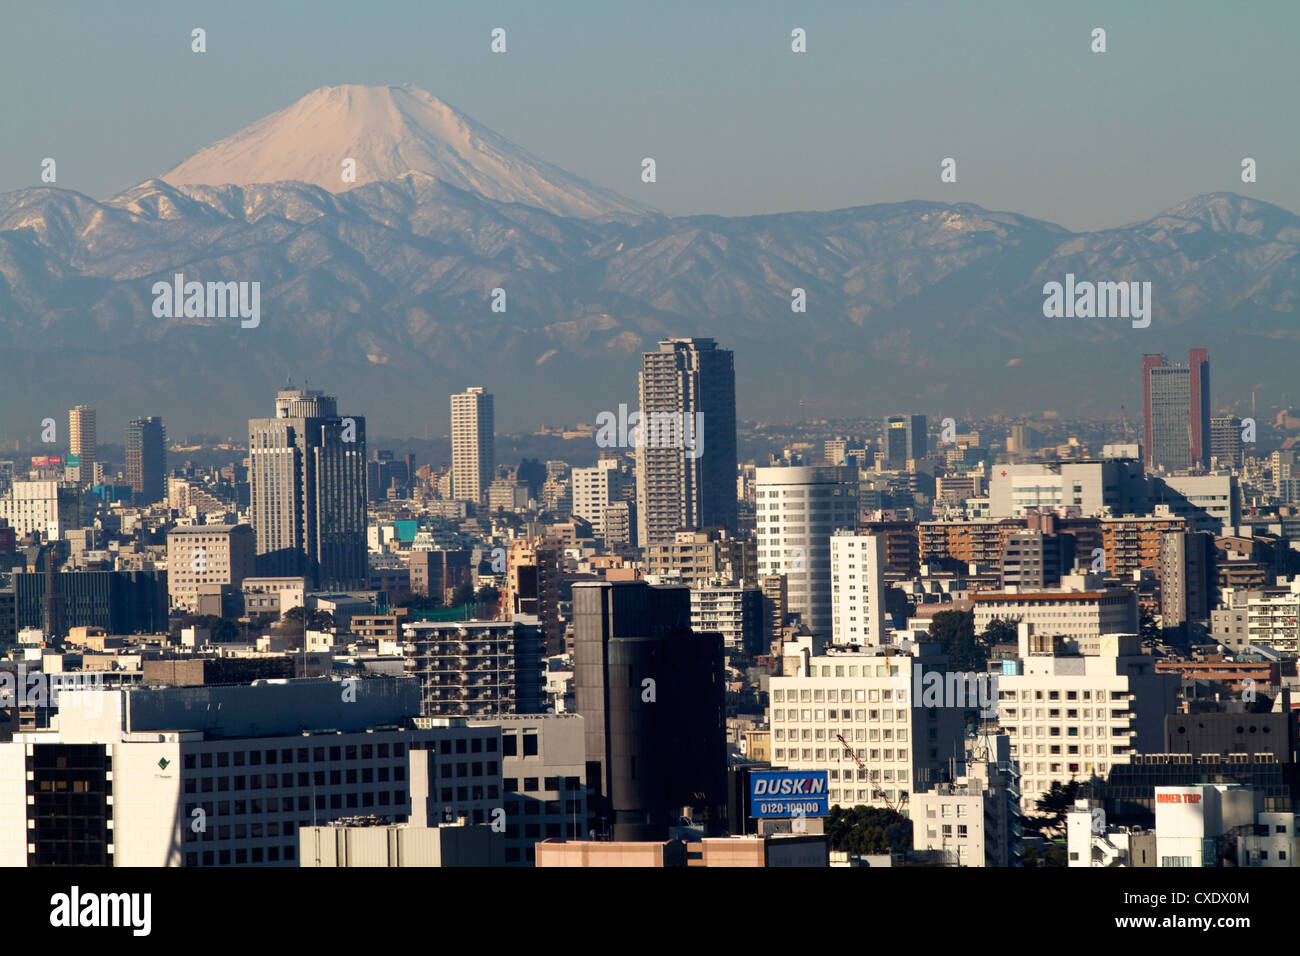 View over city of Tokyo and Mount Fuji, Tokyo, Japan, Asia Stock Photo